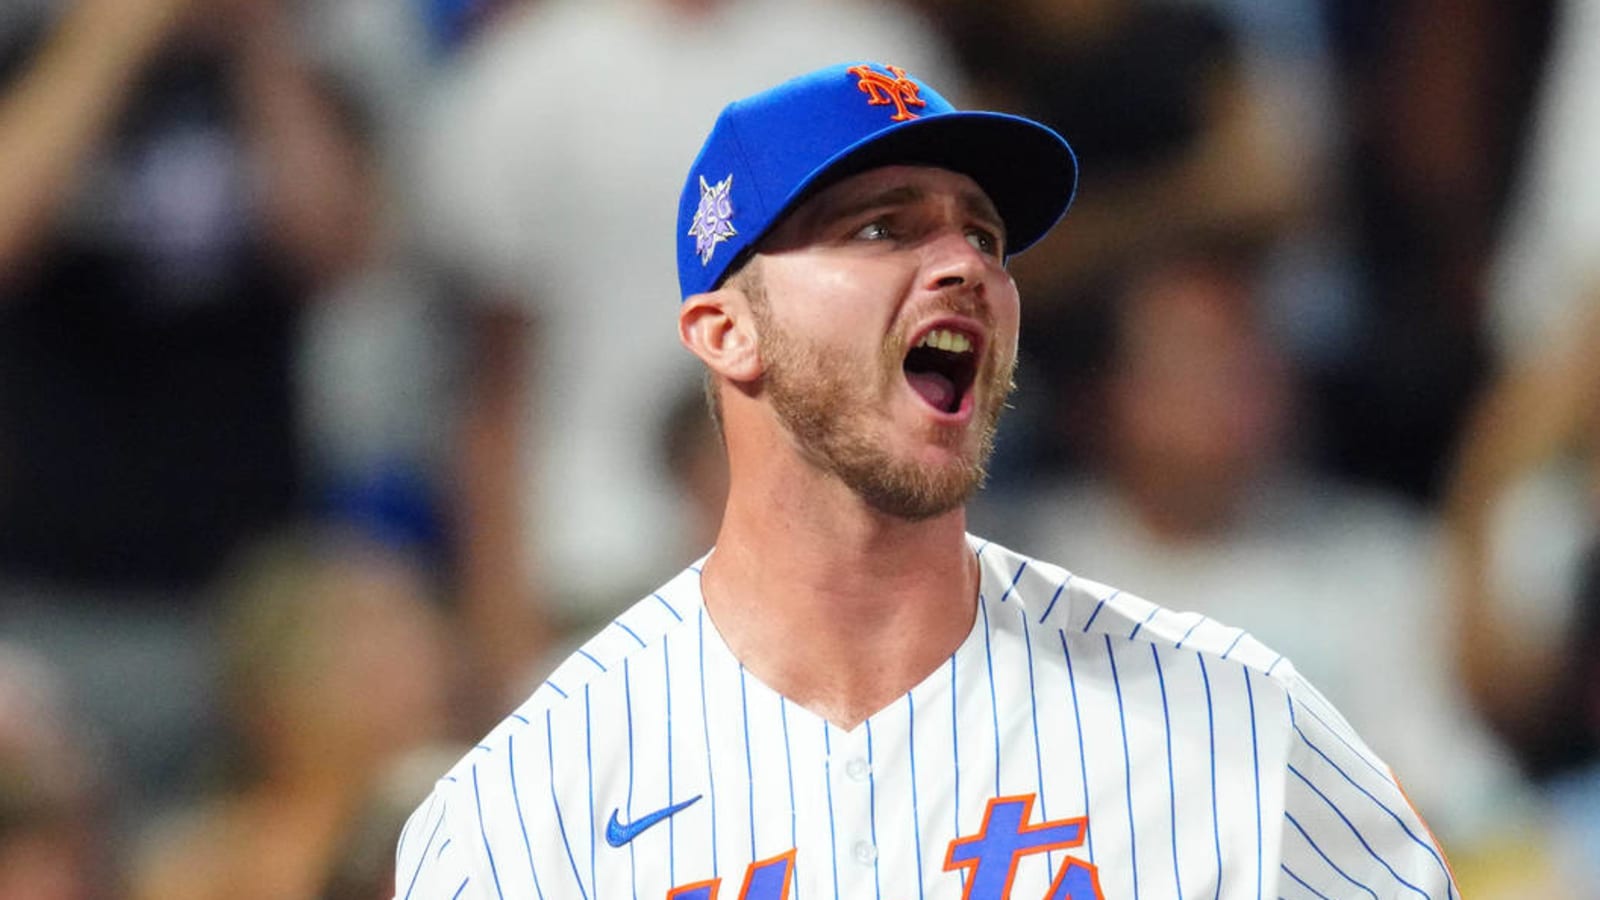 Pete Alonso wins MLB Home Run Derby: How much cash did he take